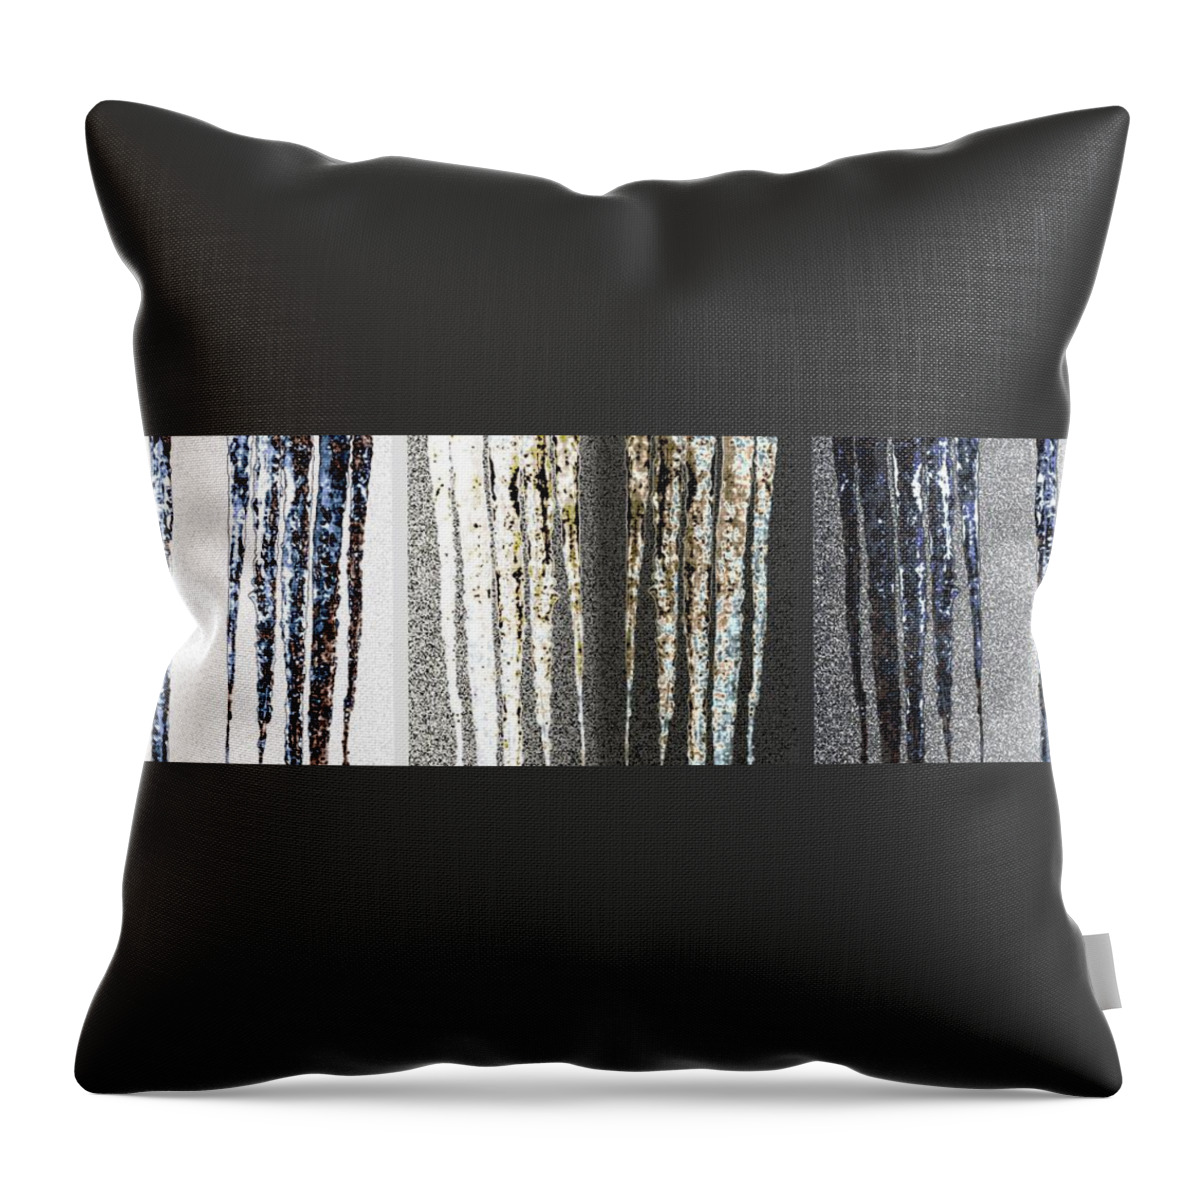 #abstracticicles Throw Pillow featuring the digital art Abstract Icicles by Will Borden